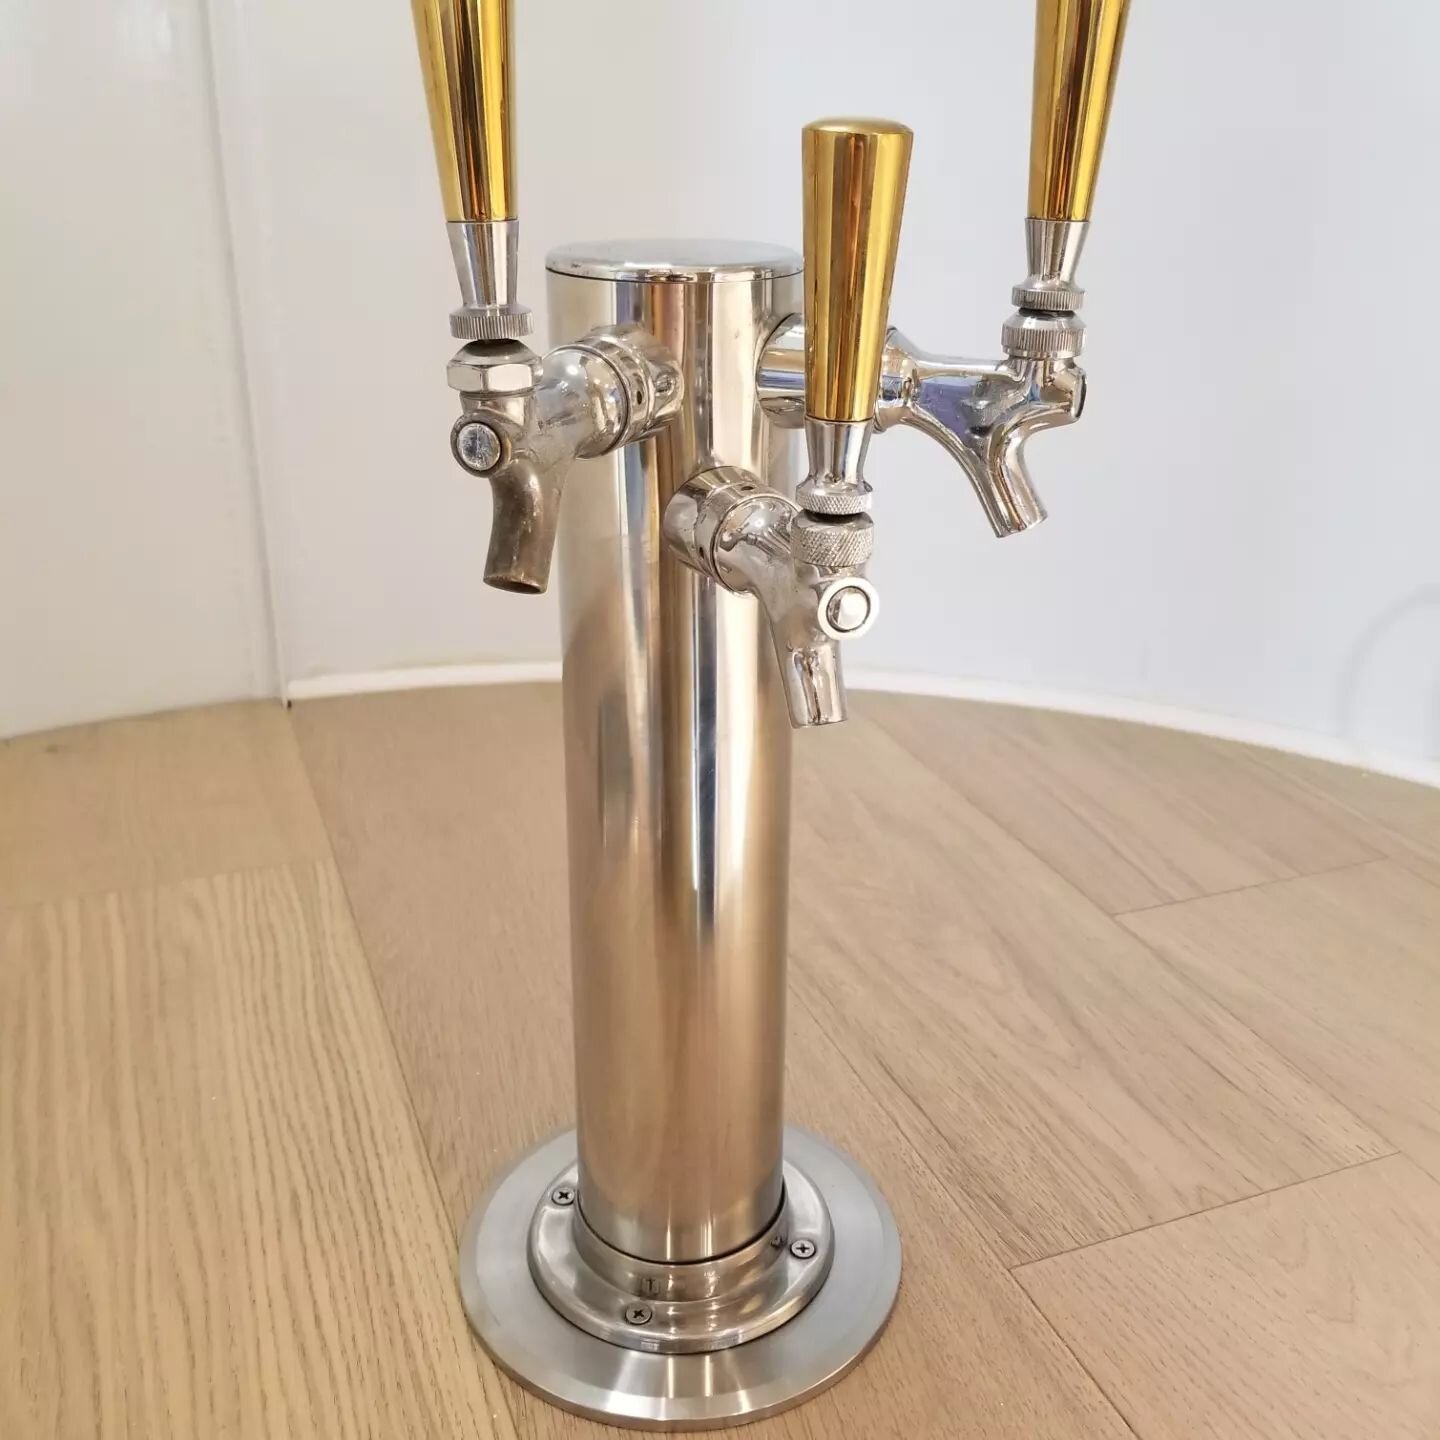 Beer Tap Tower Installation W/Custom Base

🙏Thank you @tampandmuddle.barco